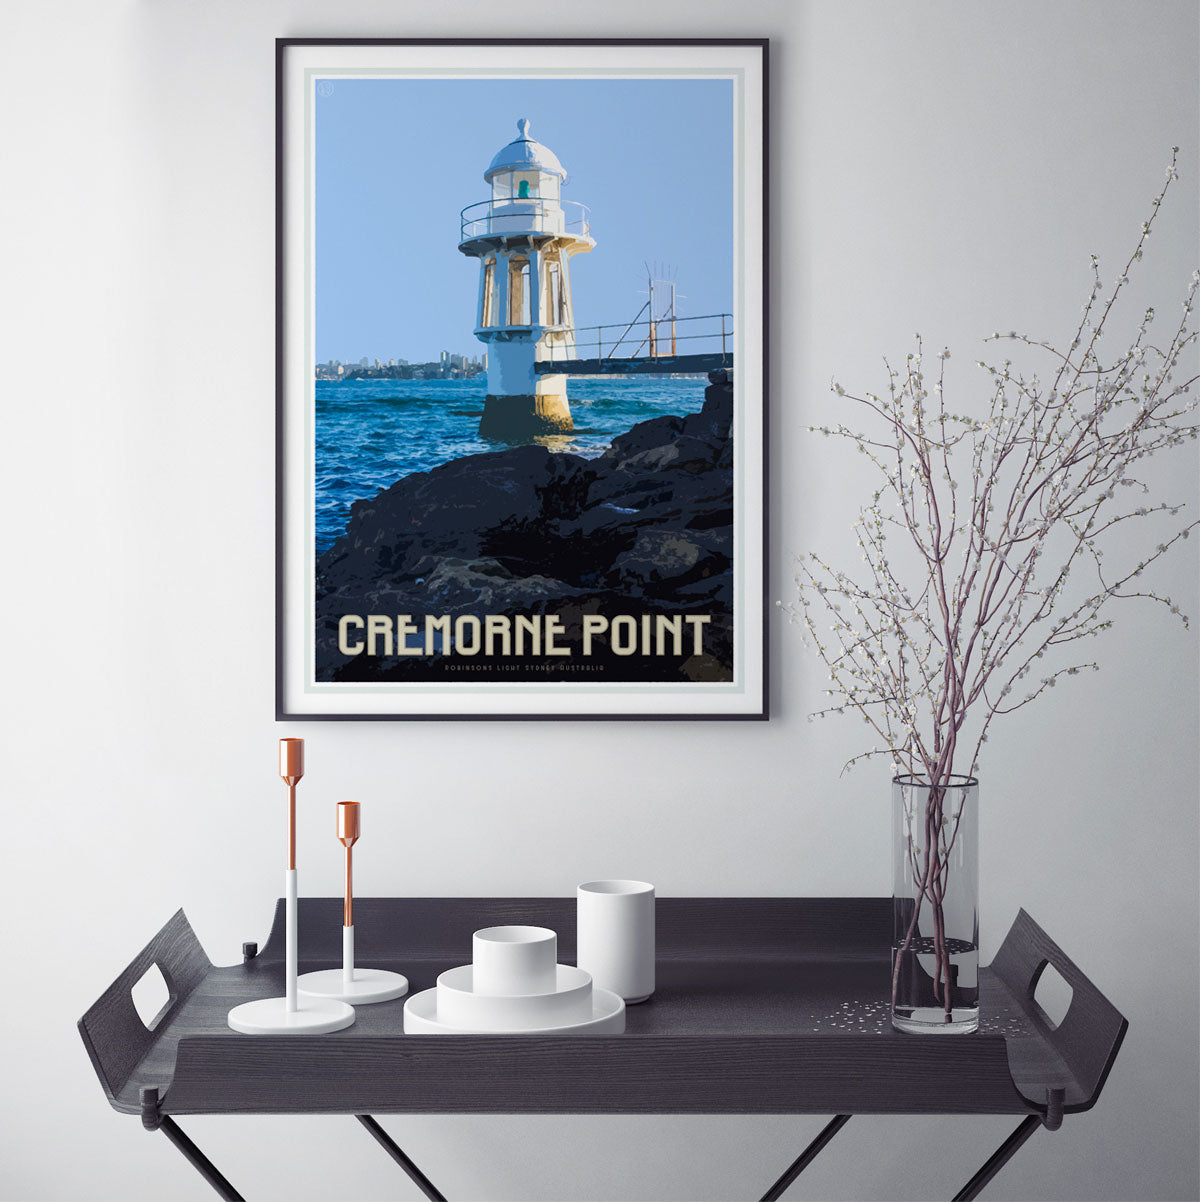 Cremorne point vintage style travel print by Places We Luv